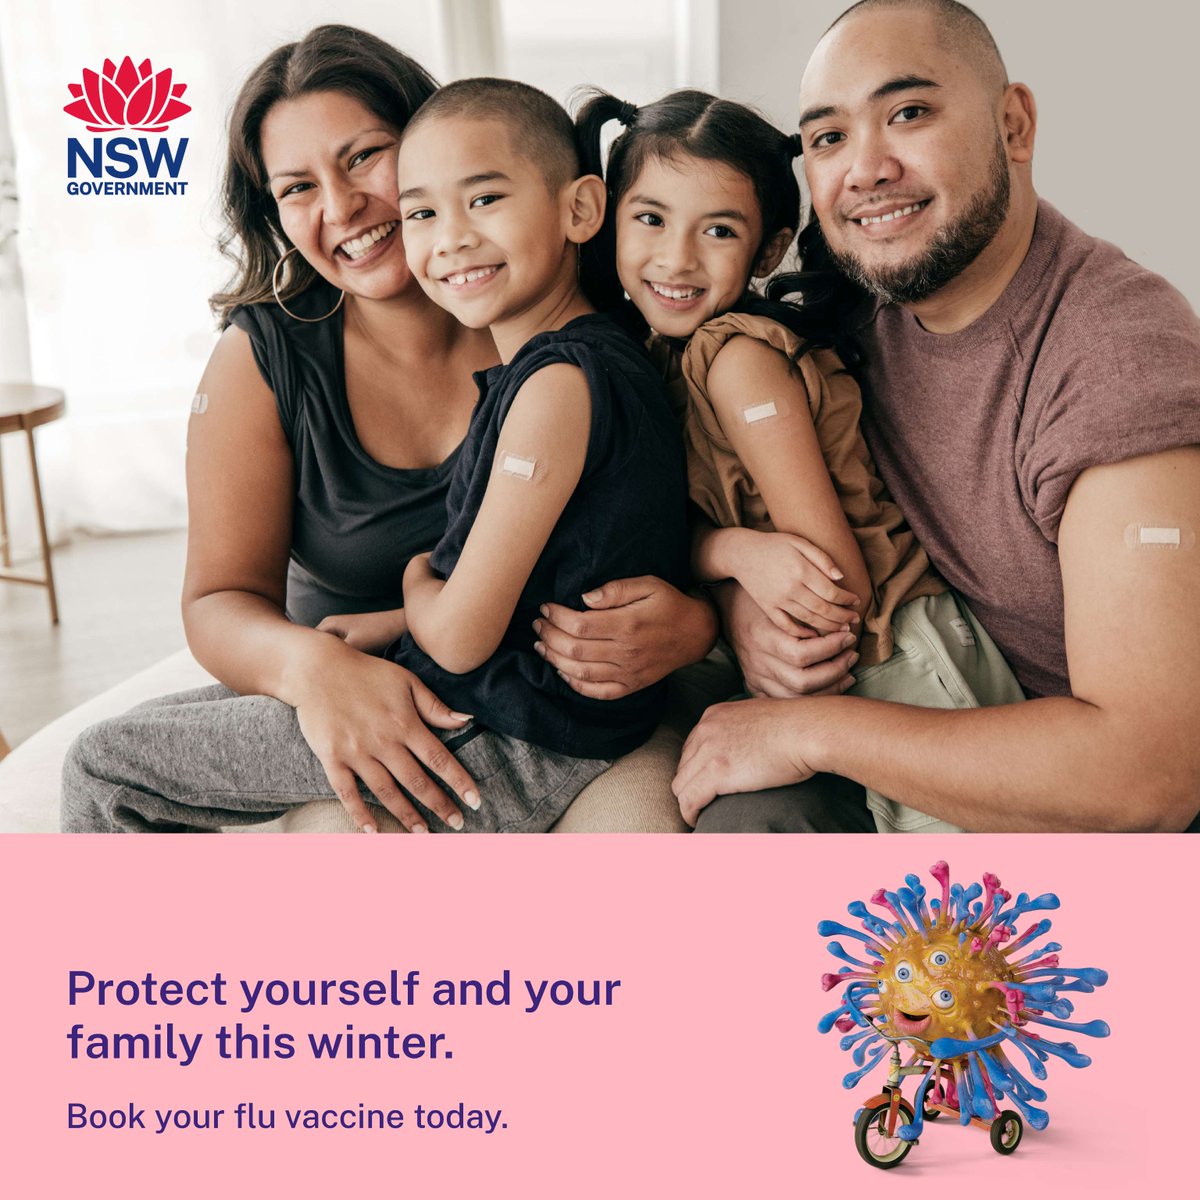 Protect yourself and your family this winter. Getting a flu vaccine is quick, easy and recommended for everyone >6mnths. Influenza is serious, but your yearly flu vaccine offers the best protection against getting really sick. Book your flu vaccine today healthdirect.gov.au/nswfluvaccine